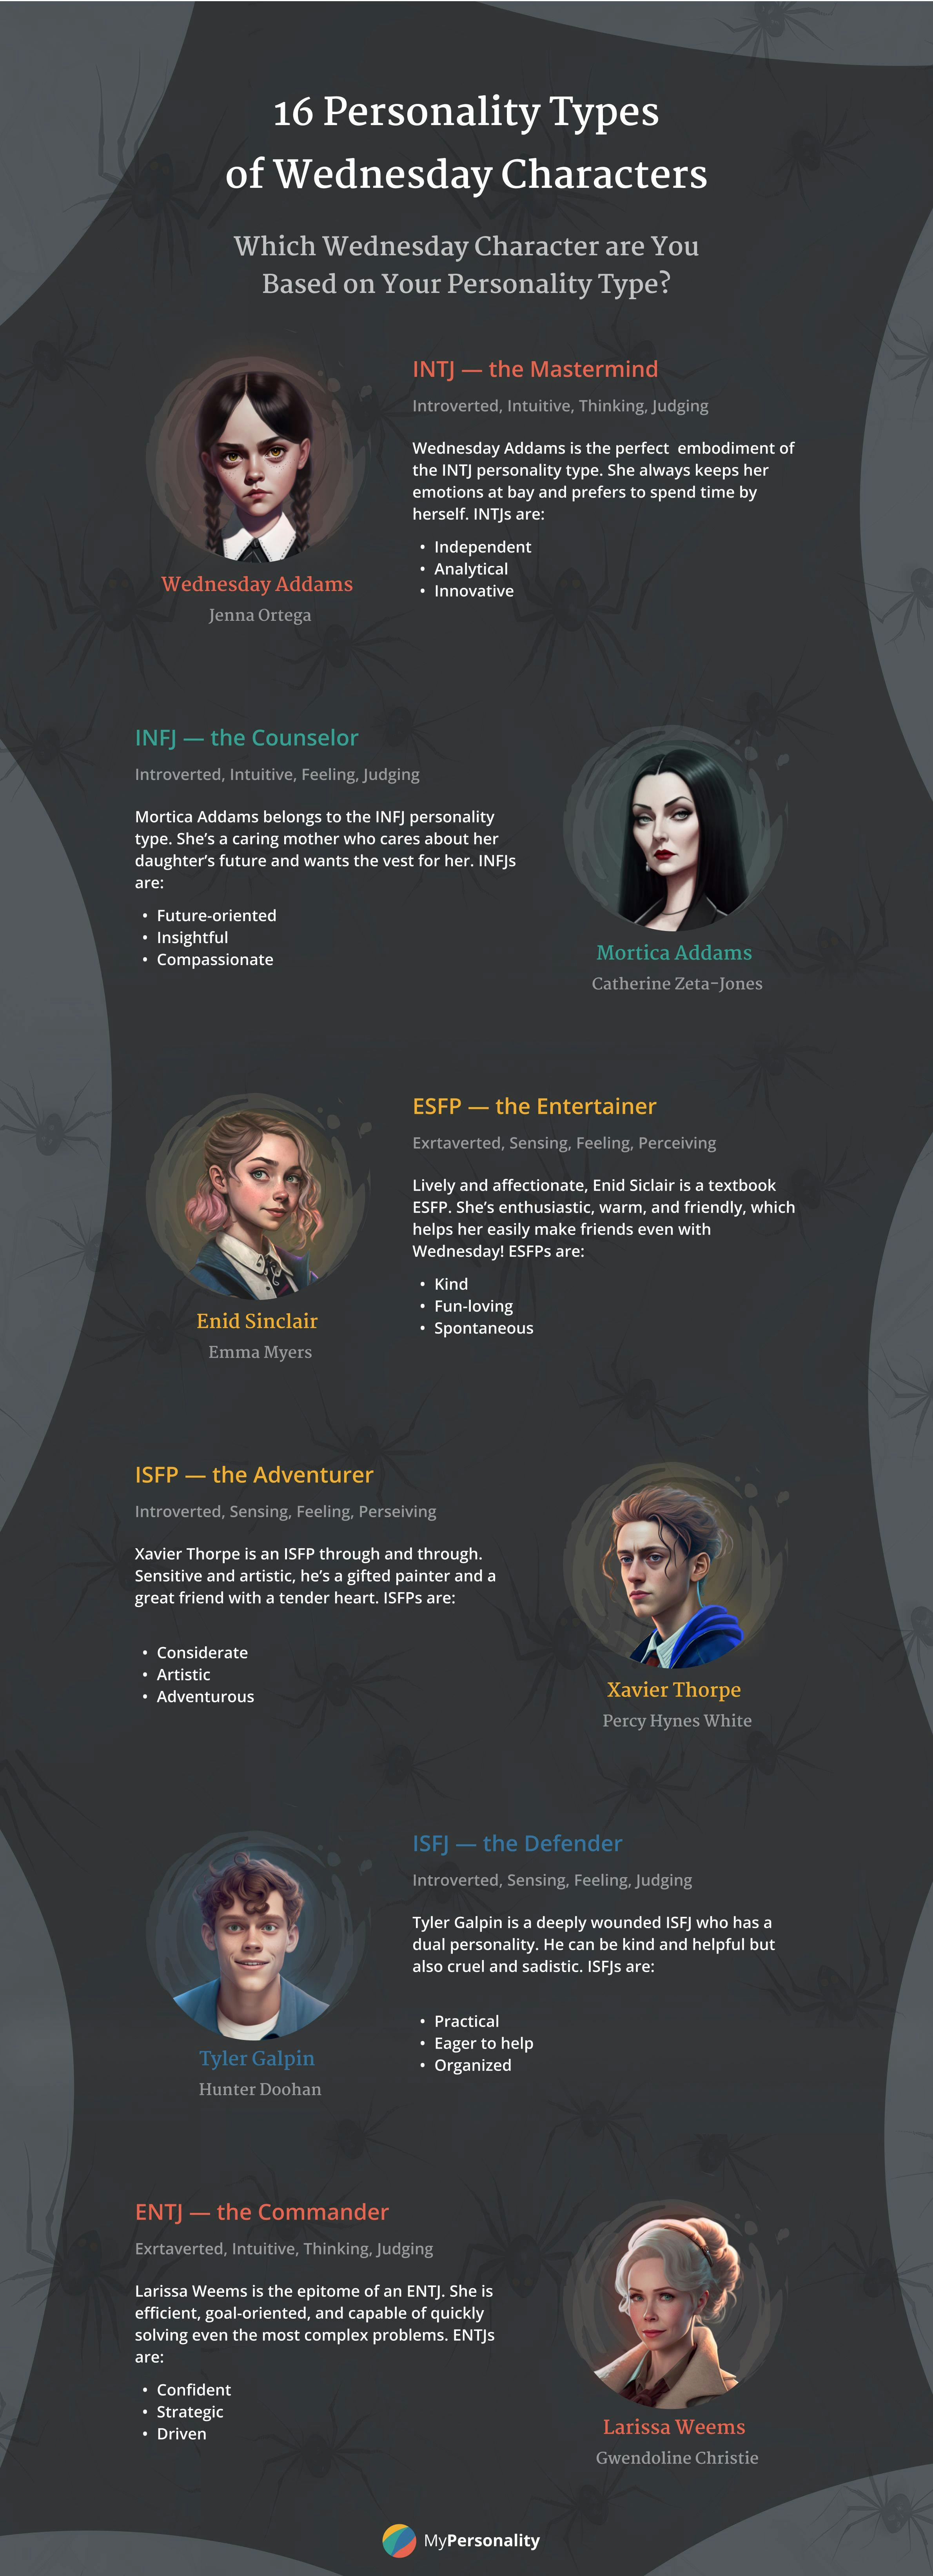 wednesday personality types infographic